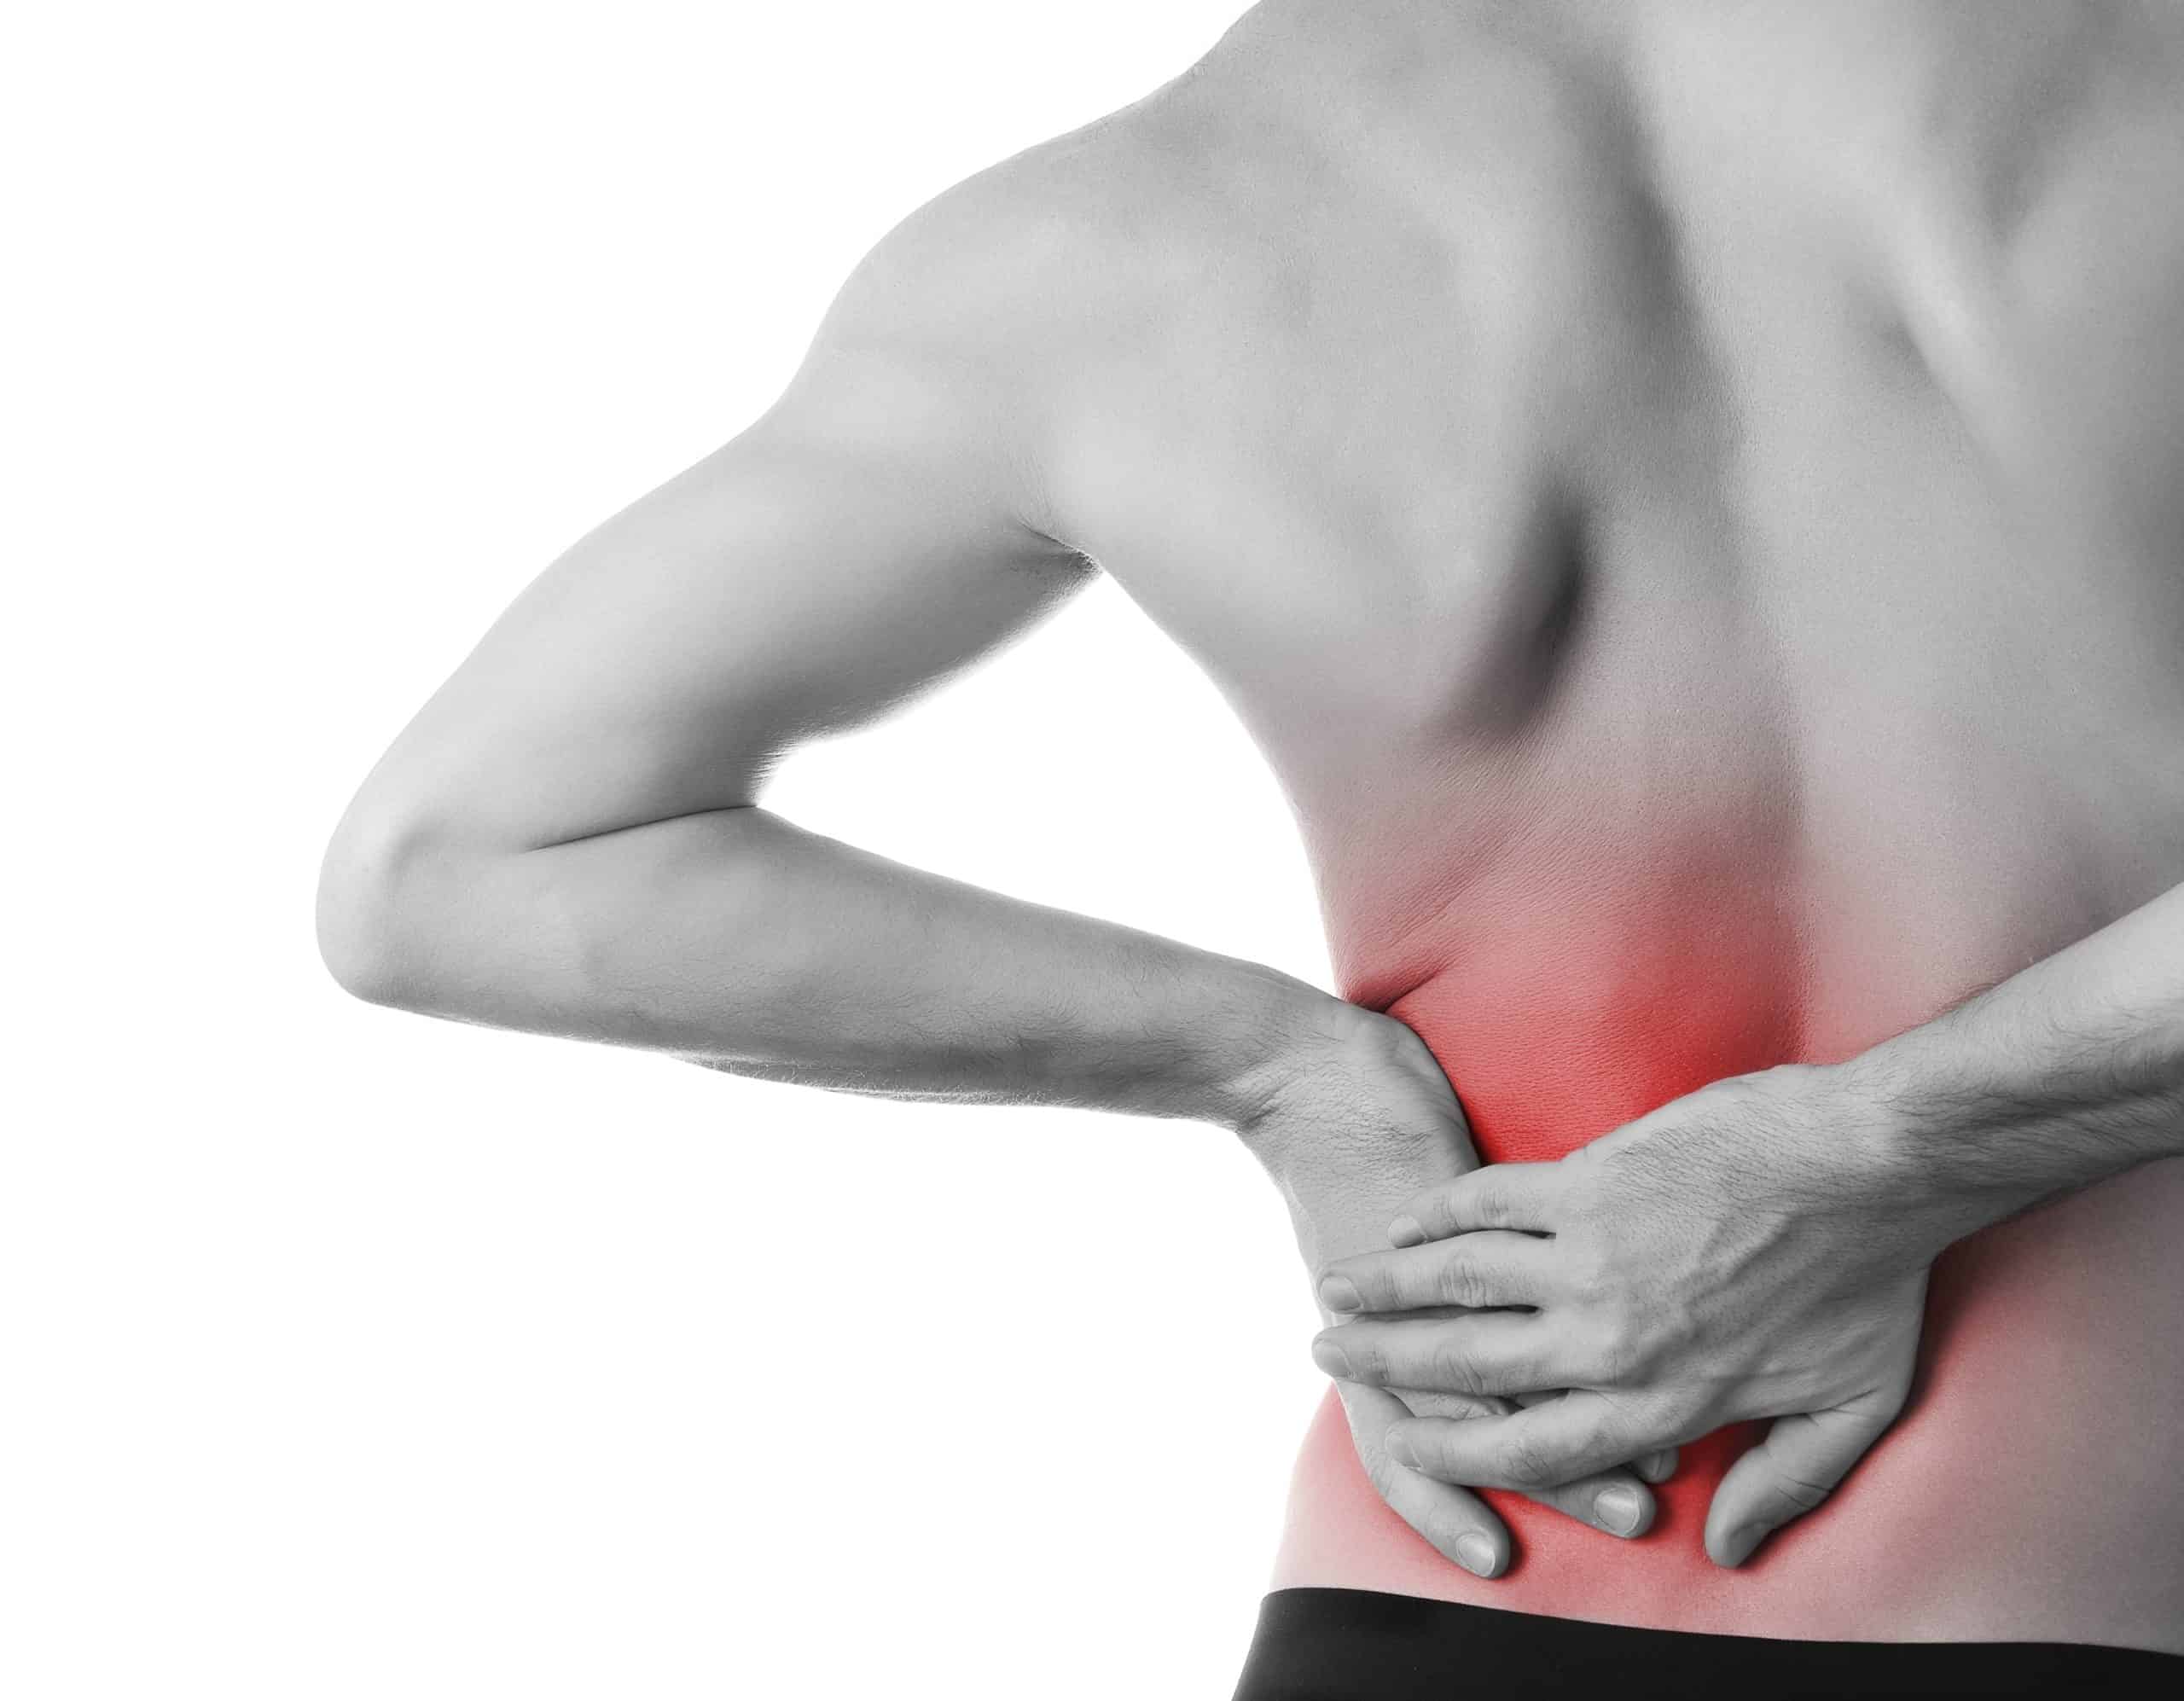 Cureus  Effects of Conventional Exercises on Lower Back Pain and